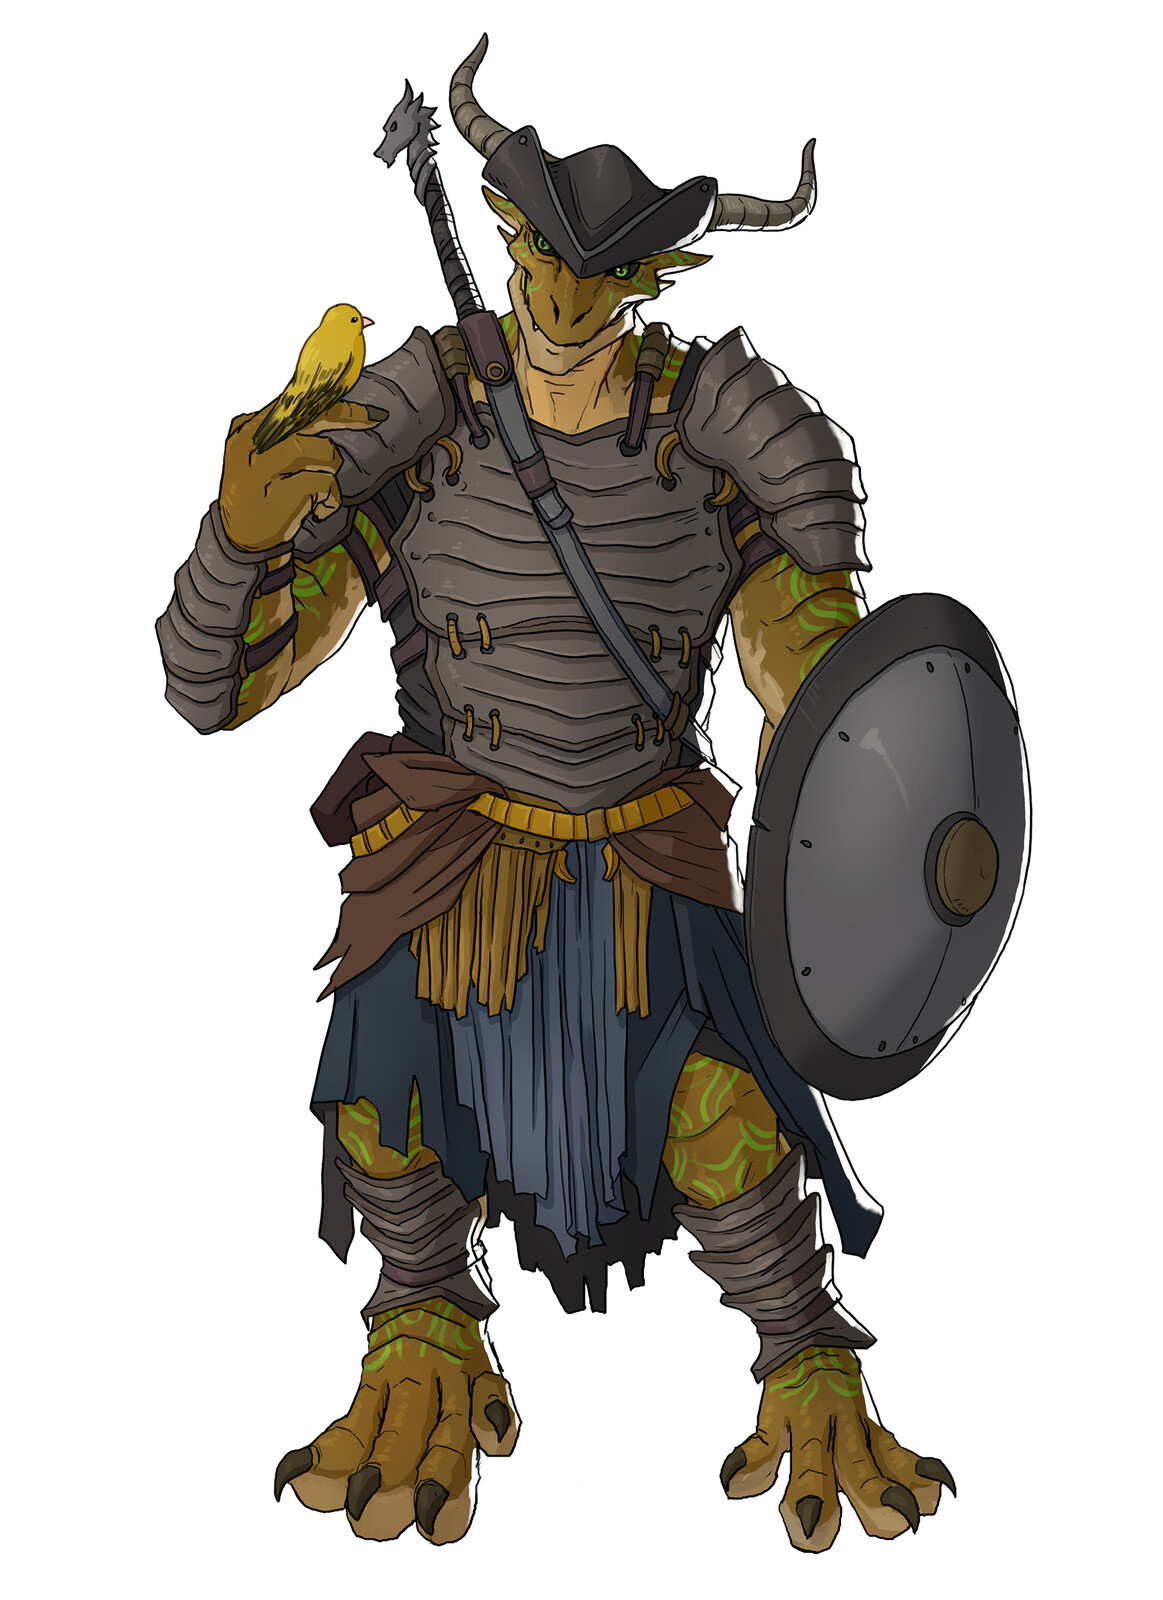 Krudos, Dragonborn Paladin of Conquest and Tweet, the yellow bird.